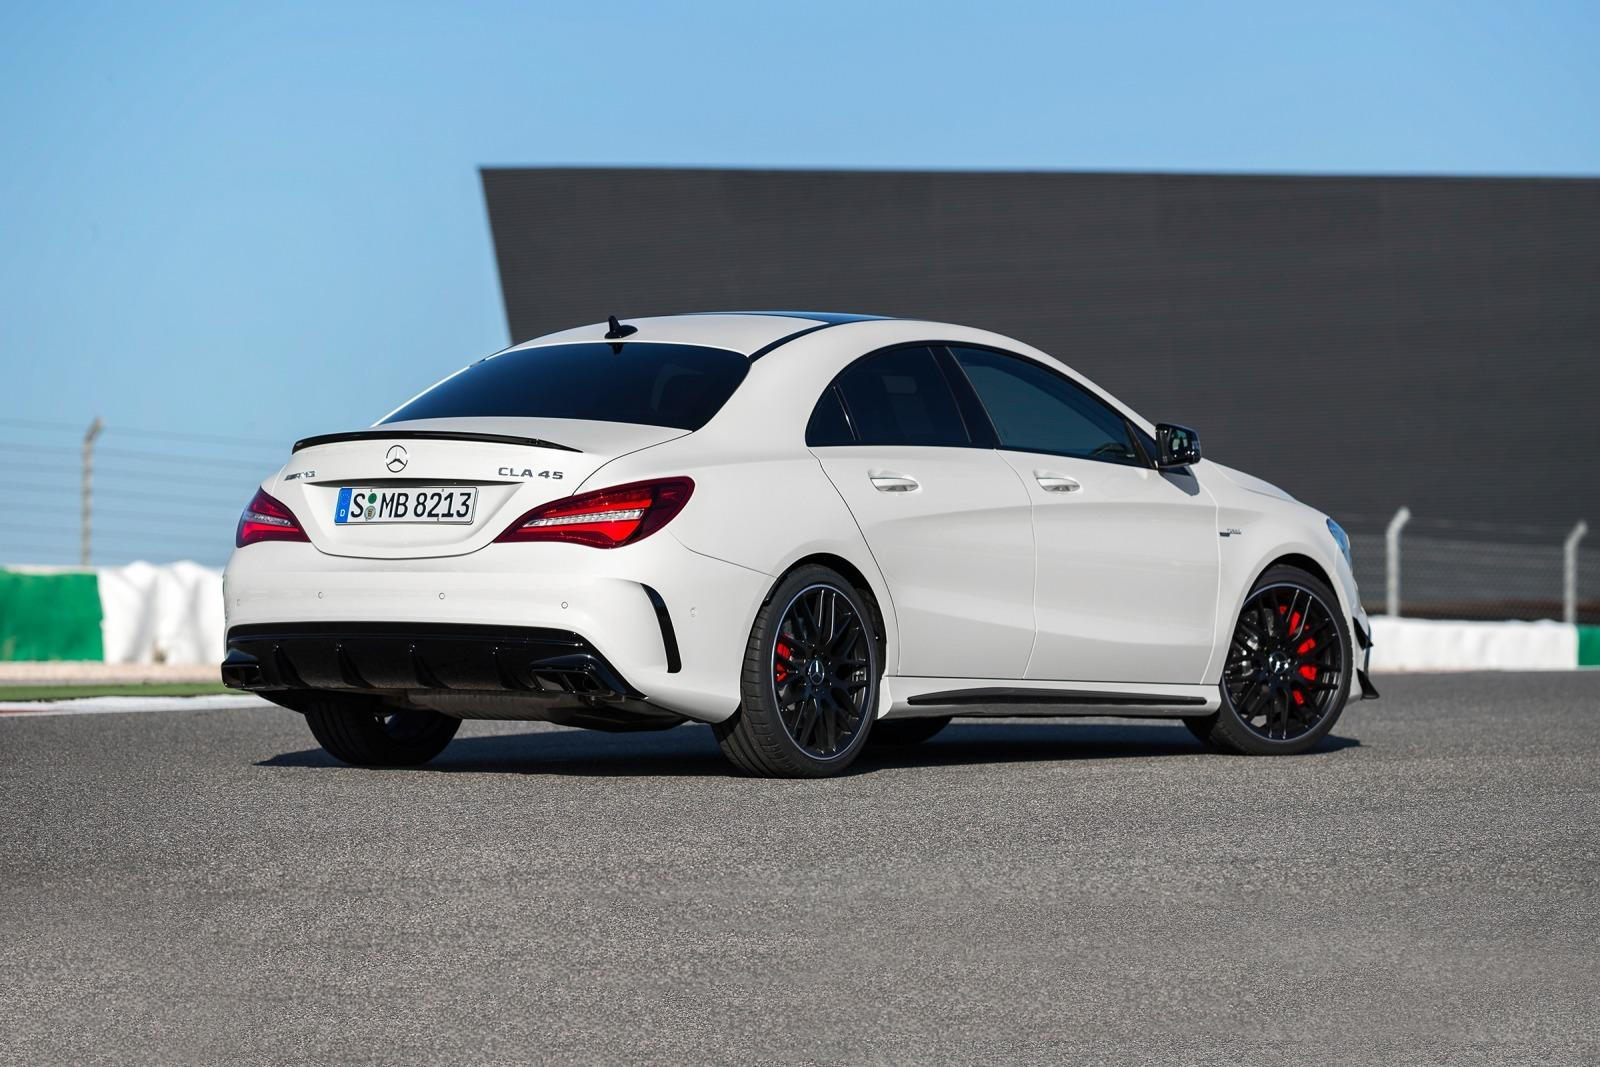 drink Pig Elevated 2019 Mercedes-AMG CLA 45 Exterior Dimensions: Colors Options & Accessories  - Photos | CarBuzz